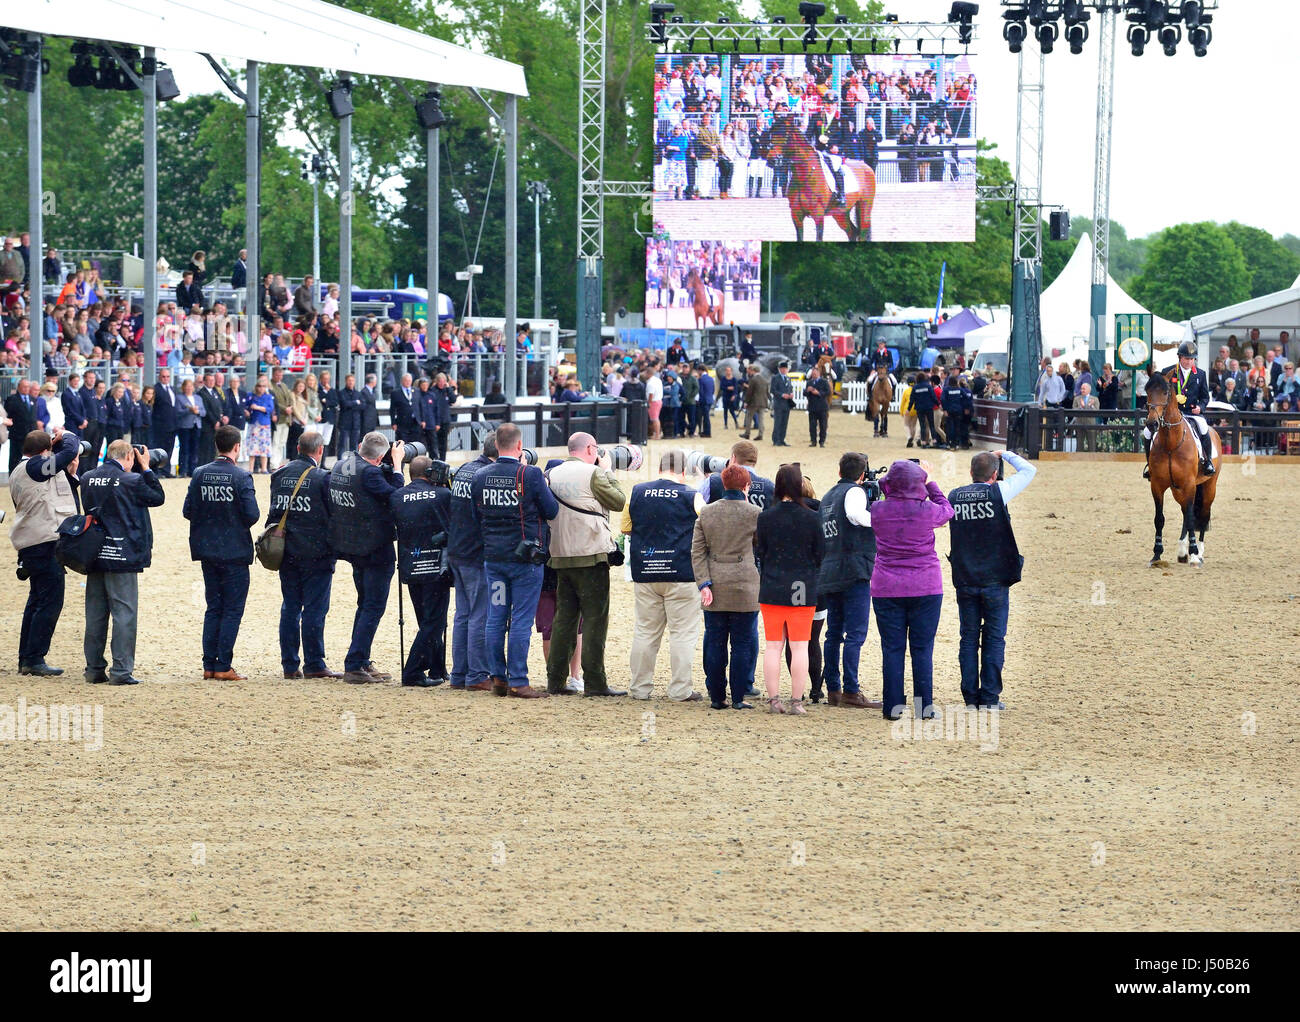 Windsor, UK. 14th May, 2017. The Royal Windsor Horse Show 2017. Nick Skelton had announced his retirement. Big Star, the stallion with whom he won two Olympic gold medals, will also be retiring from the sport. An official farewell ceremony was held in the Castle Arena for this legendary partnership at Royal Windsor Horse. Three of Skelton's fellow British stars – John Whitaker, Michael Whitaker and Scott Brash entered the arena on horseback to accompany him as Auld Lang Syne played on the speakers. Credit: Gary Blake/Alamy Live News Stock Photo